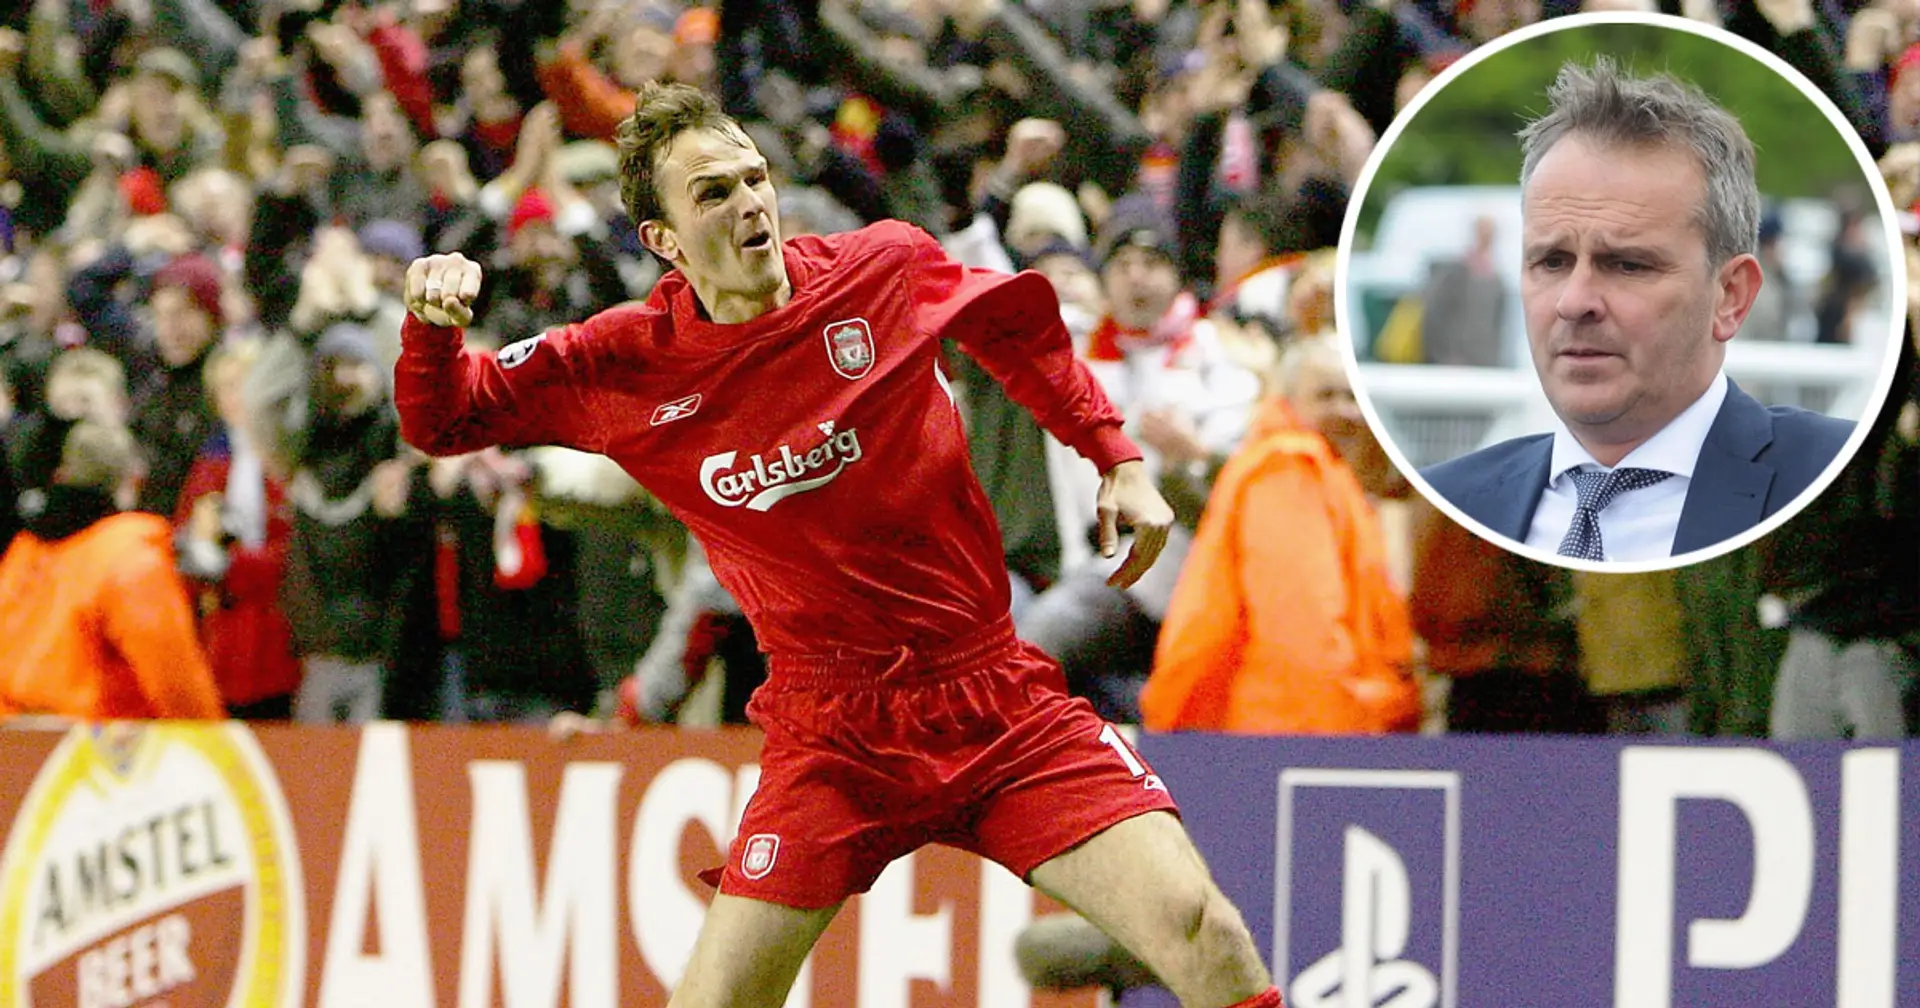 Didi Hamann on his move to Liverpool: 'It took me a few months to realise what a club it was that I'd joined'